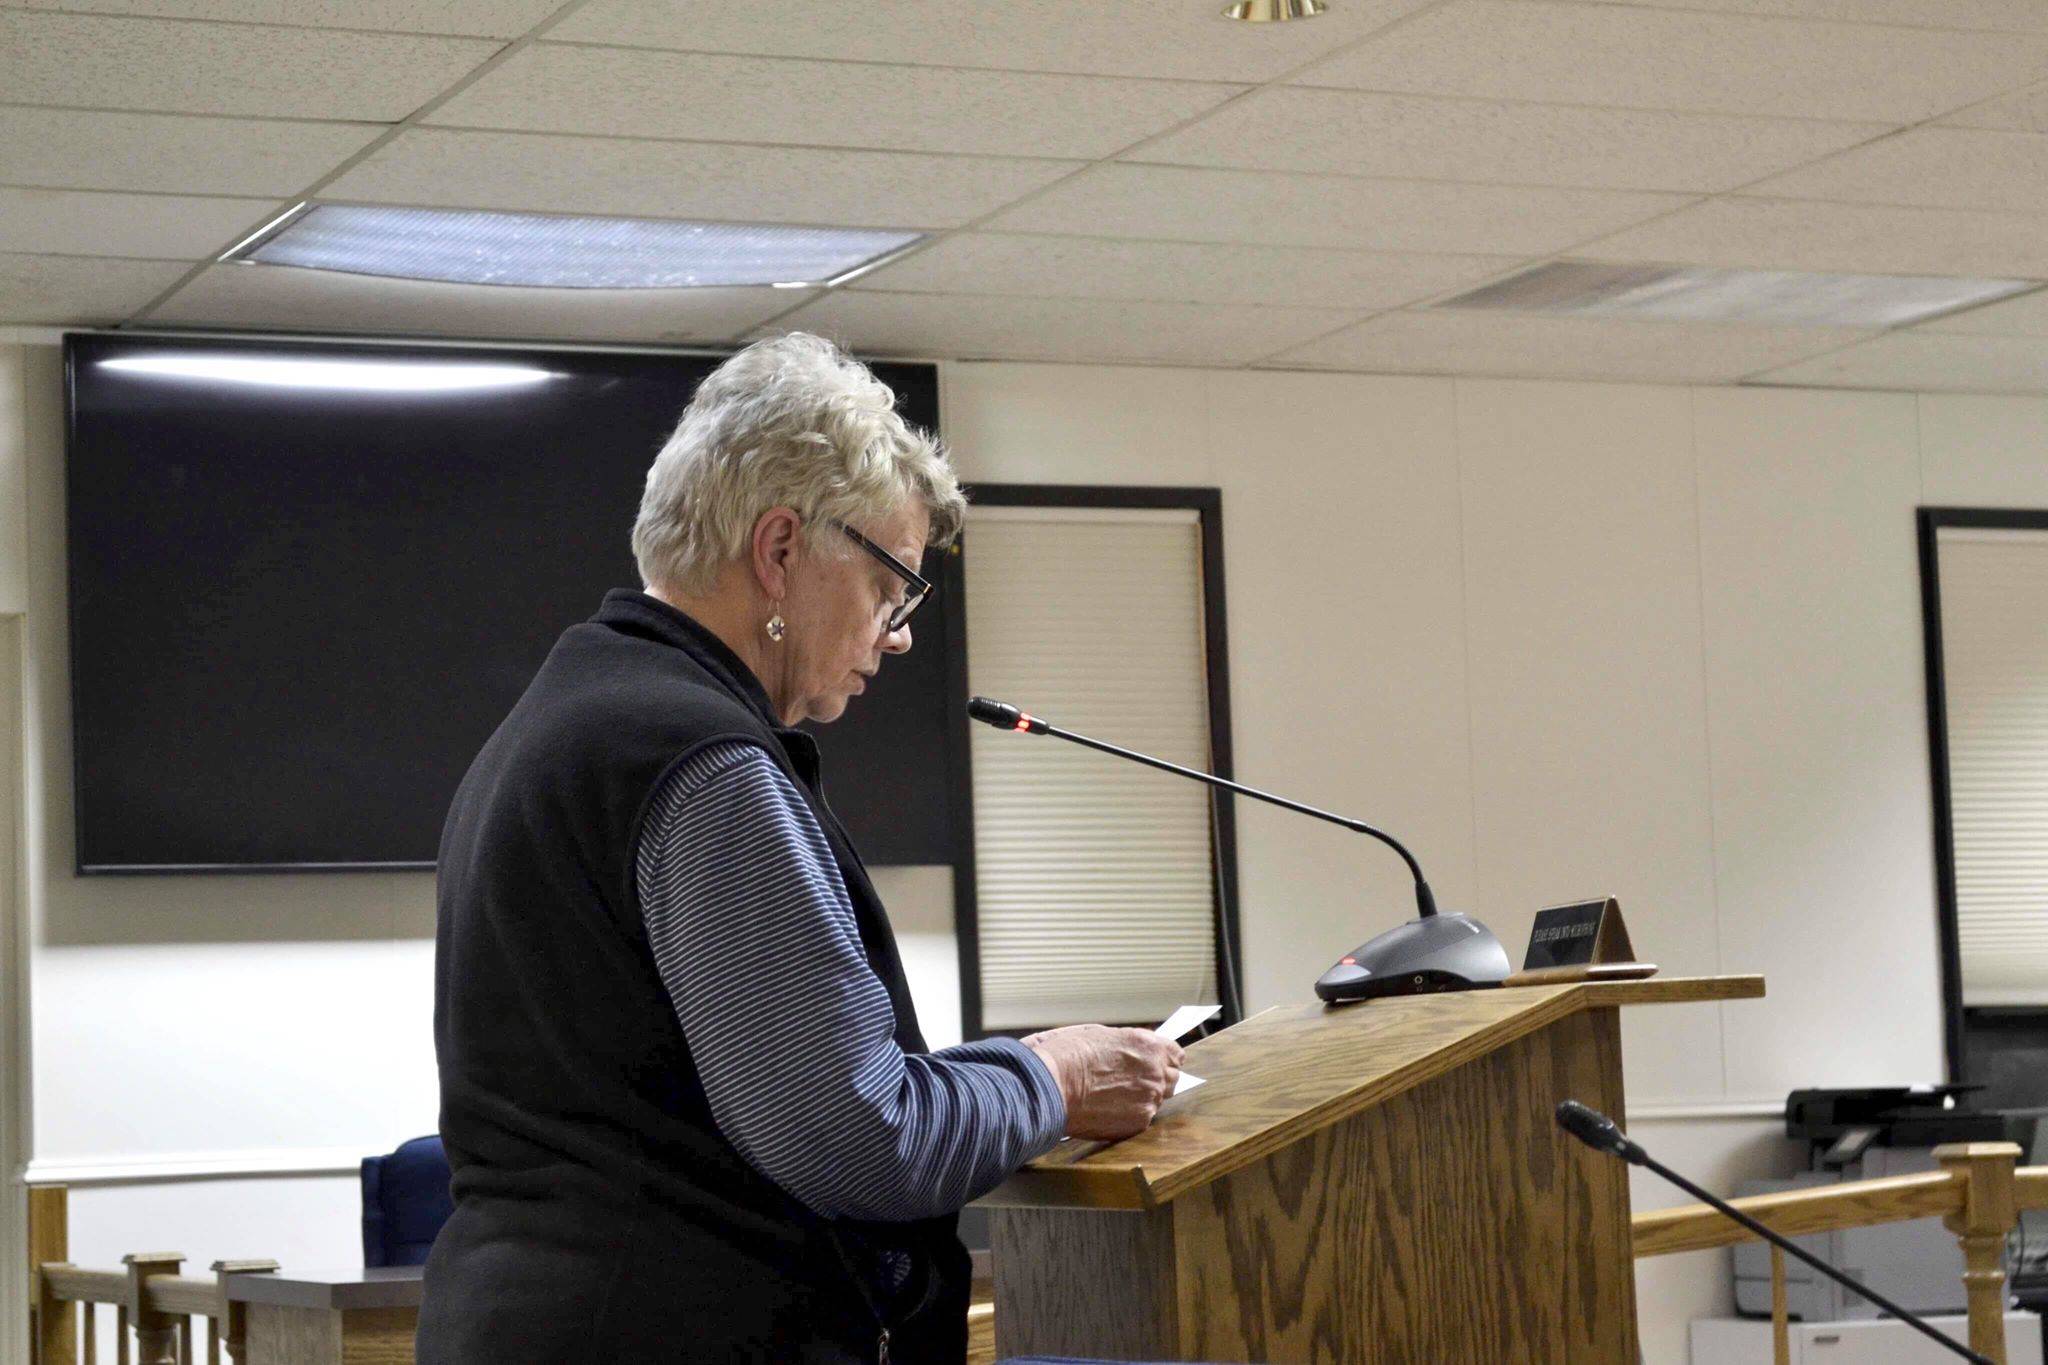 Peggy Mullen, who has lived in the Soldotna area for over 70 years, speaks to the Kenai Peninsula Borough Assembly in support of the borough’s 2019 Comprehensive Plan and its inclusion of climate change mitigation policies and strategies, on Tuesday,, in Soldotna . (Photo by Victoria Petersen/Peninsula Clarion)